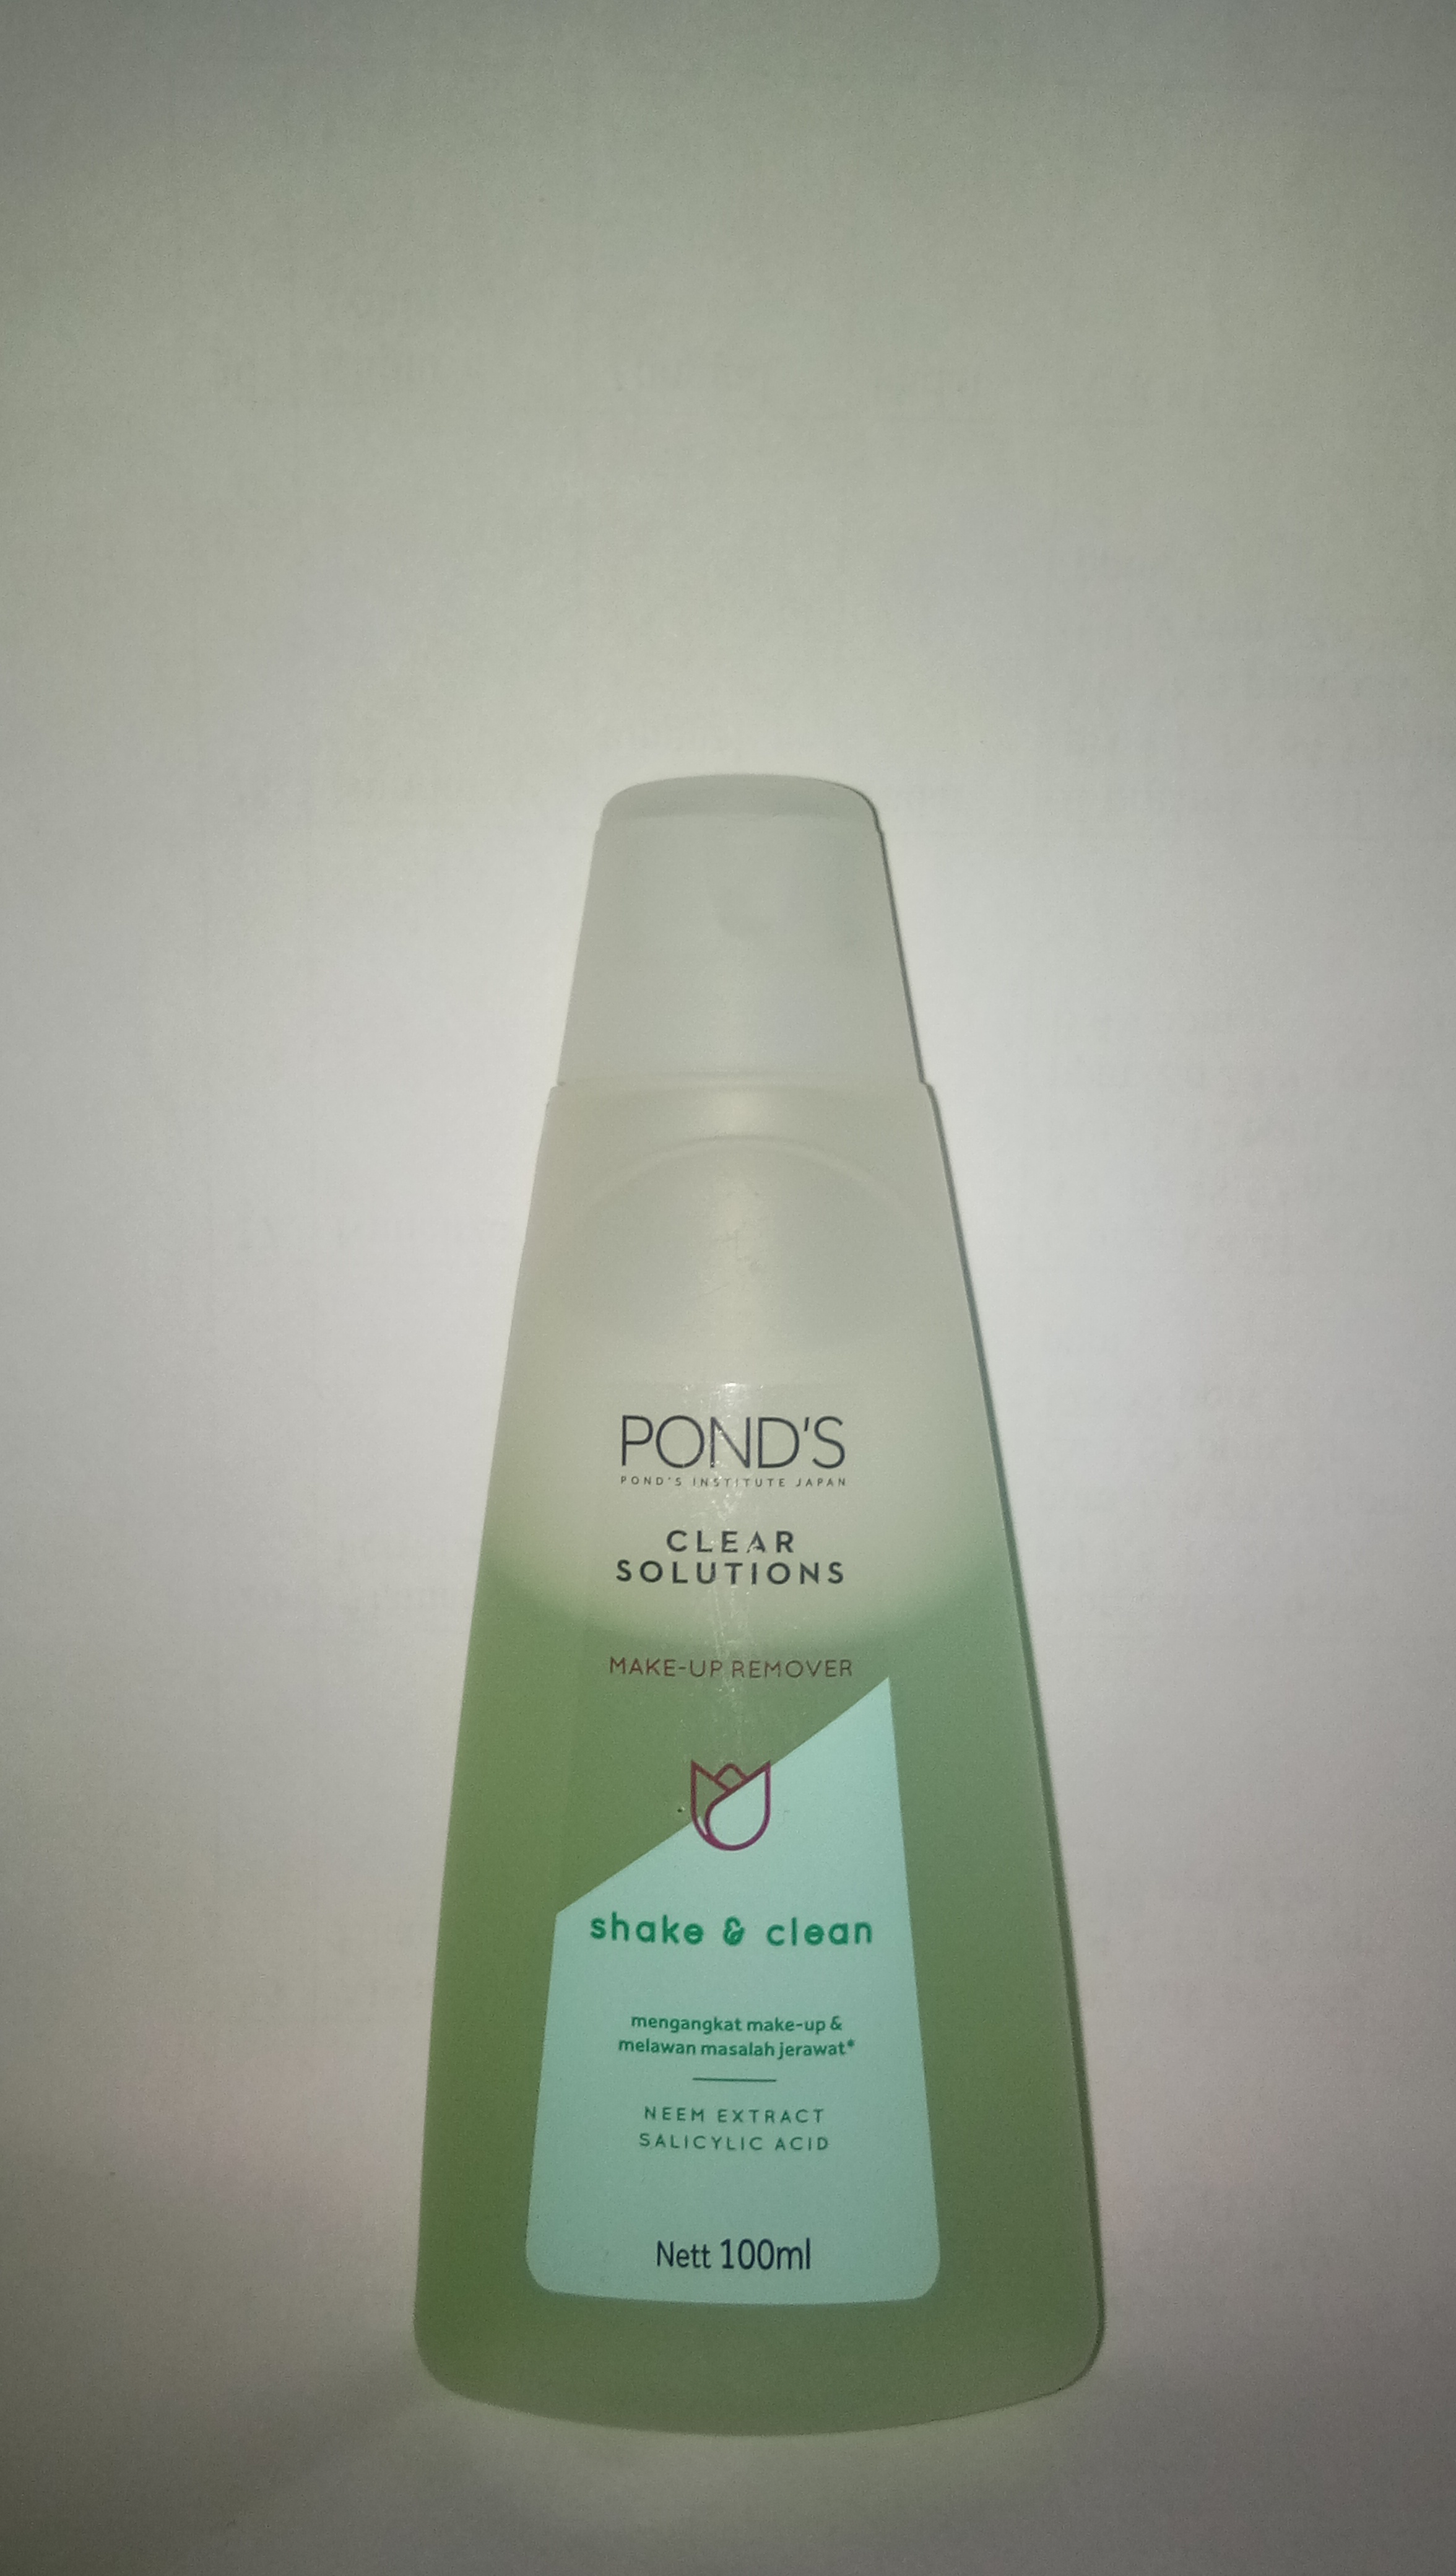 Pond's Clear Solutions Shake & Clean